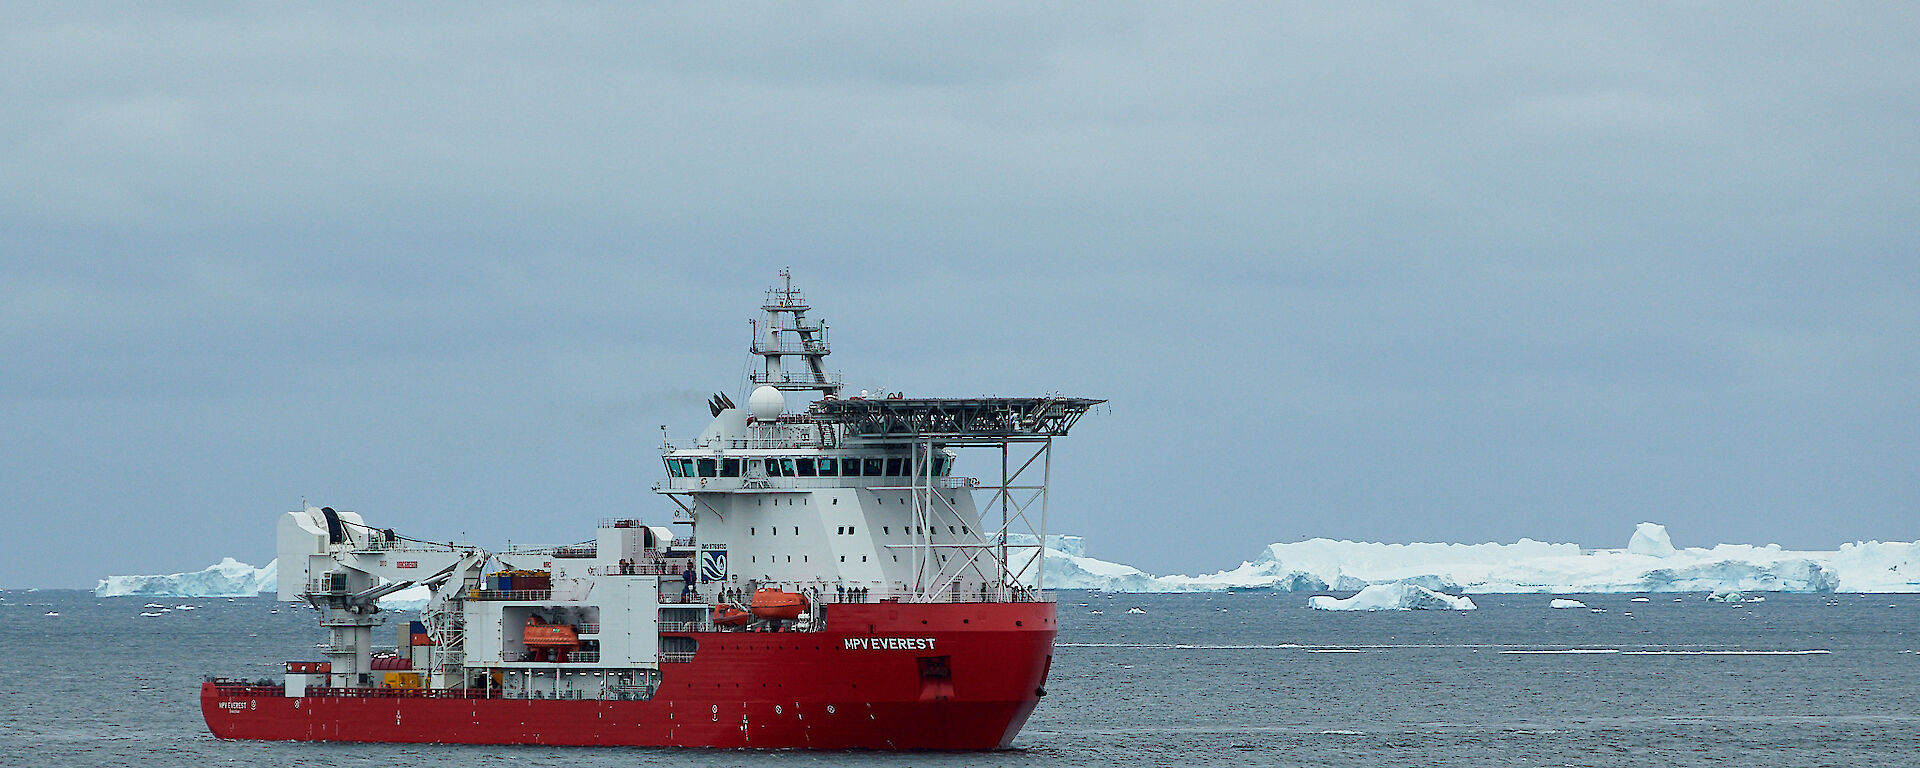 A large red and white ship sits out in a bay with icebergs on the horizon